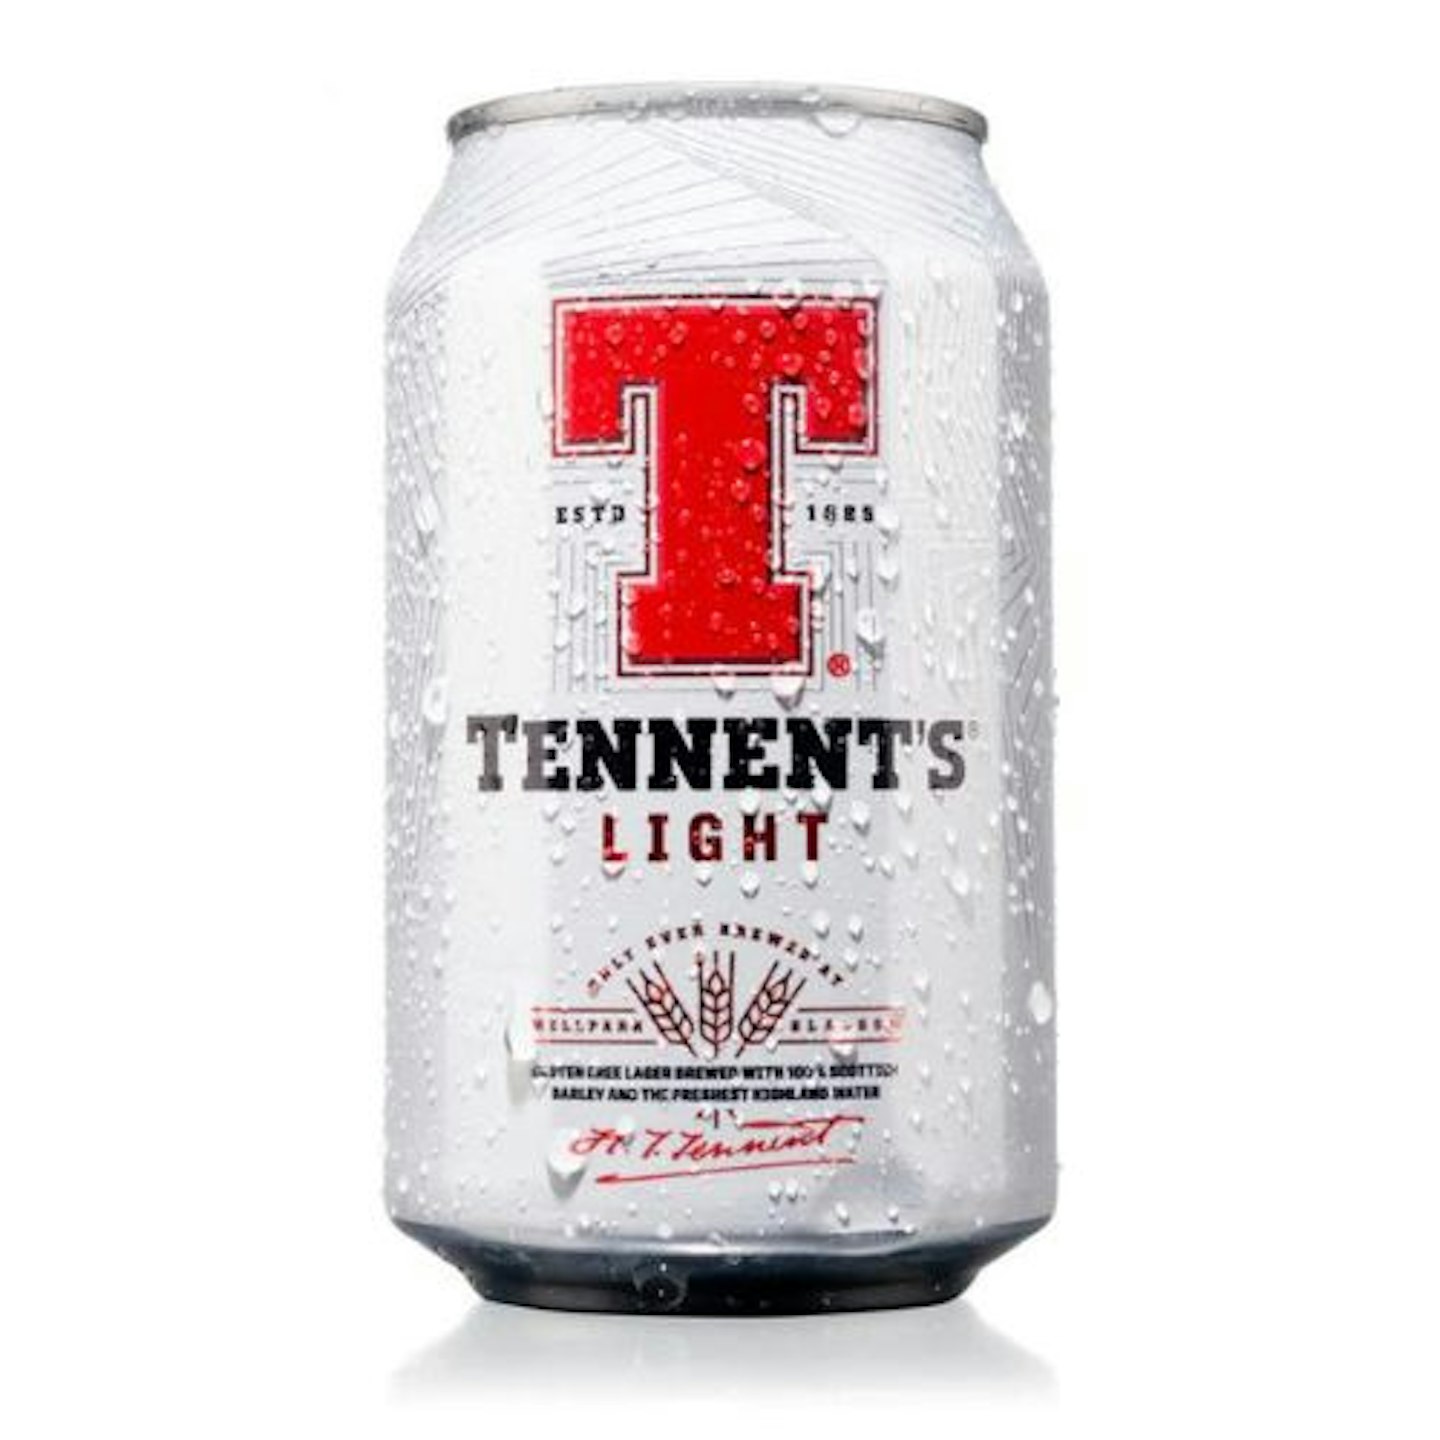 Tennents Light Lager Cans